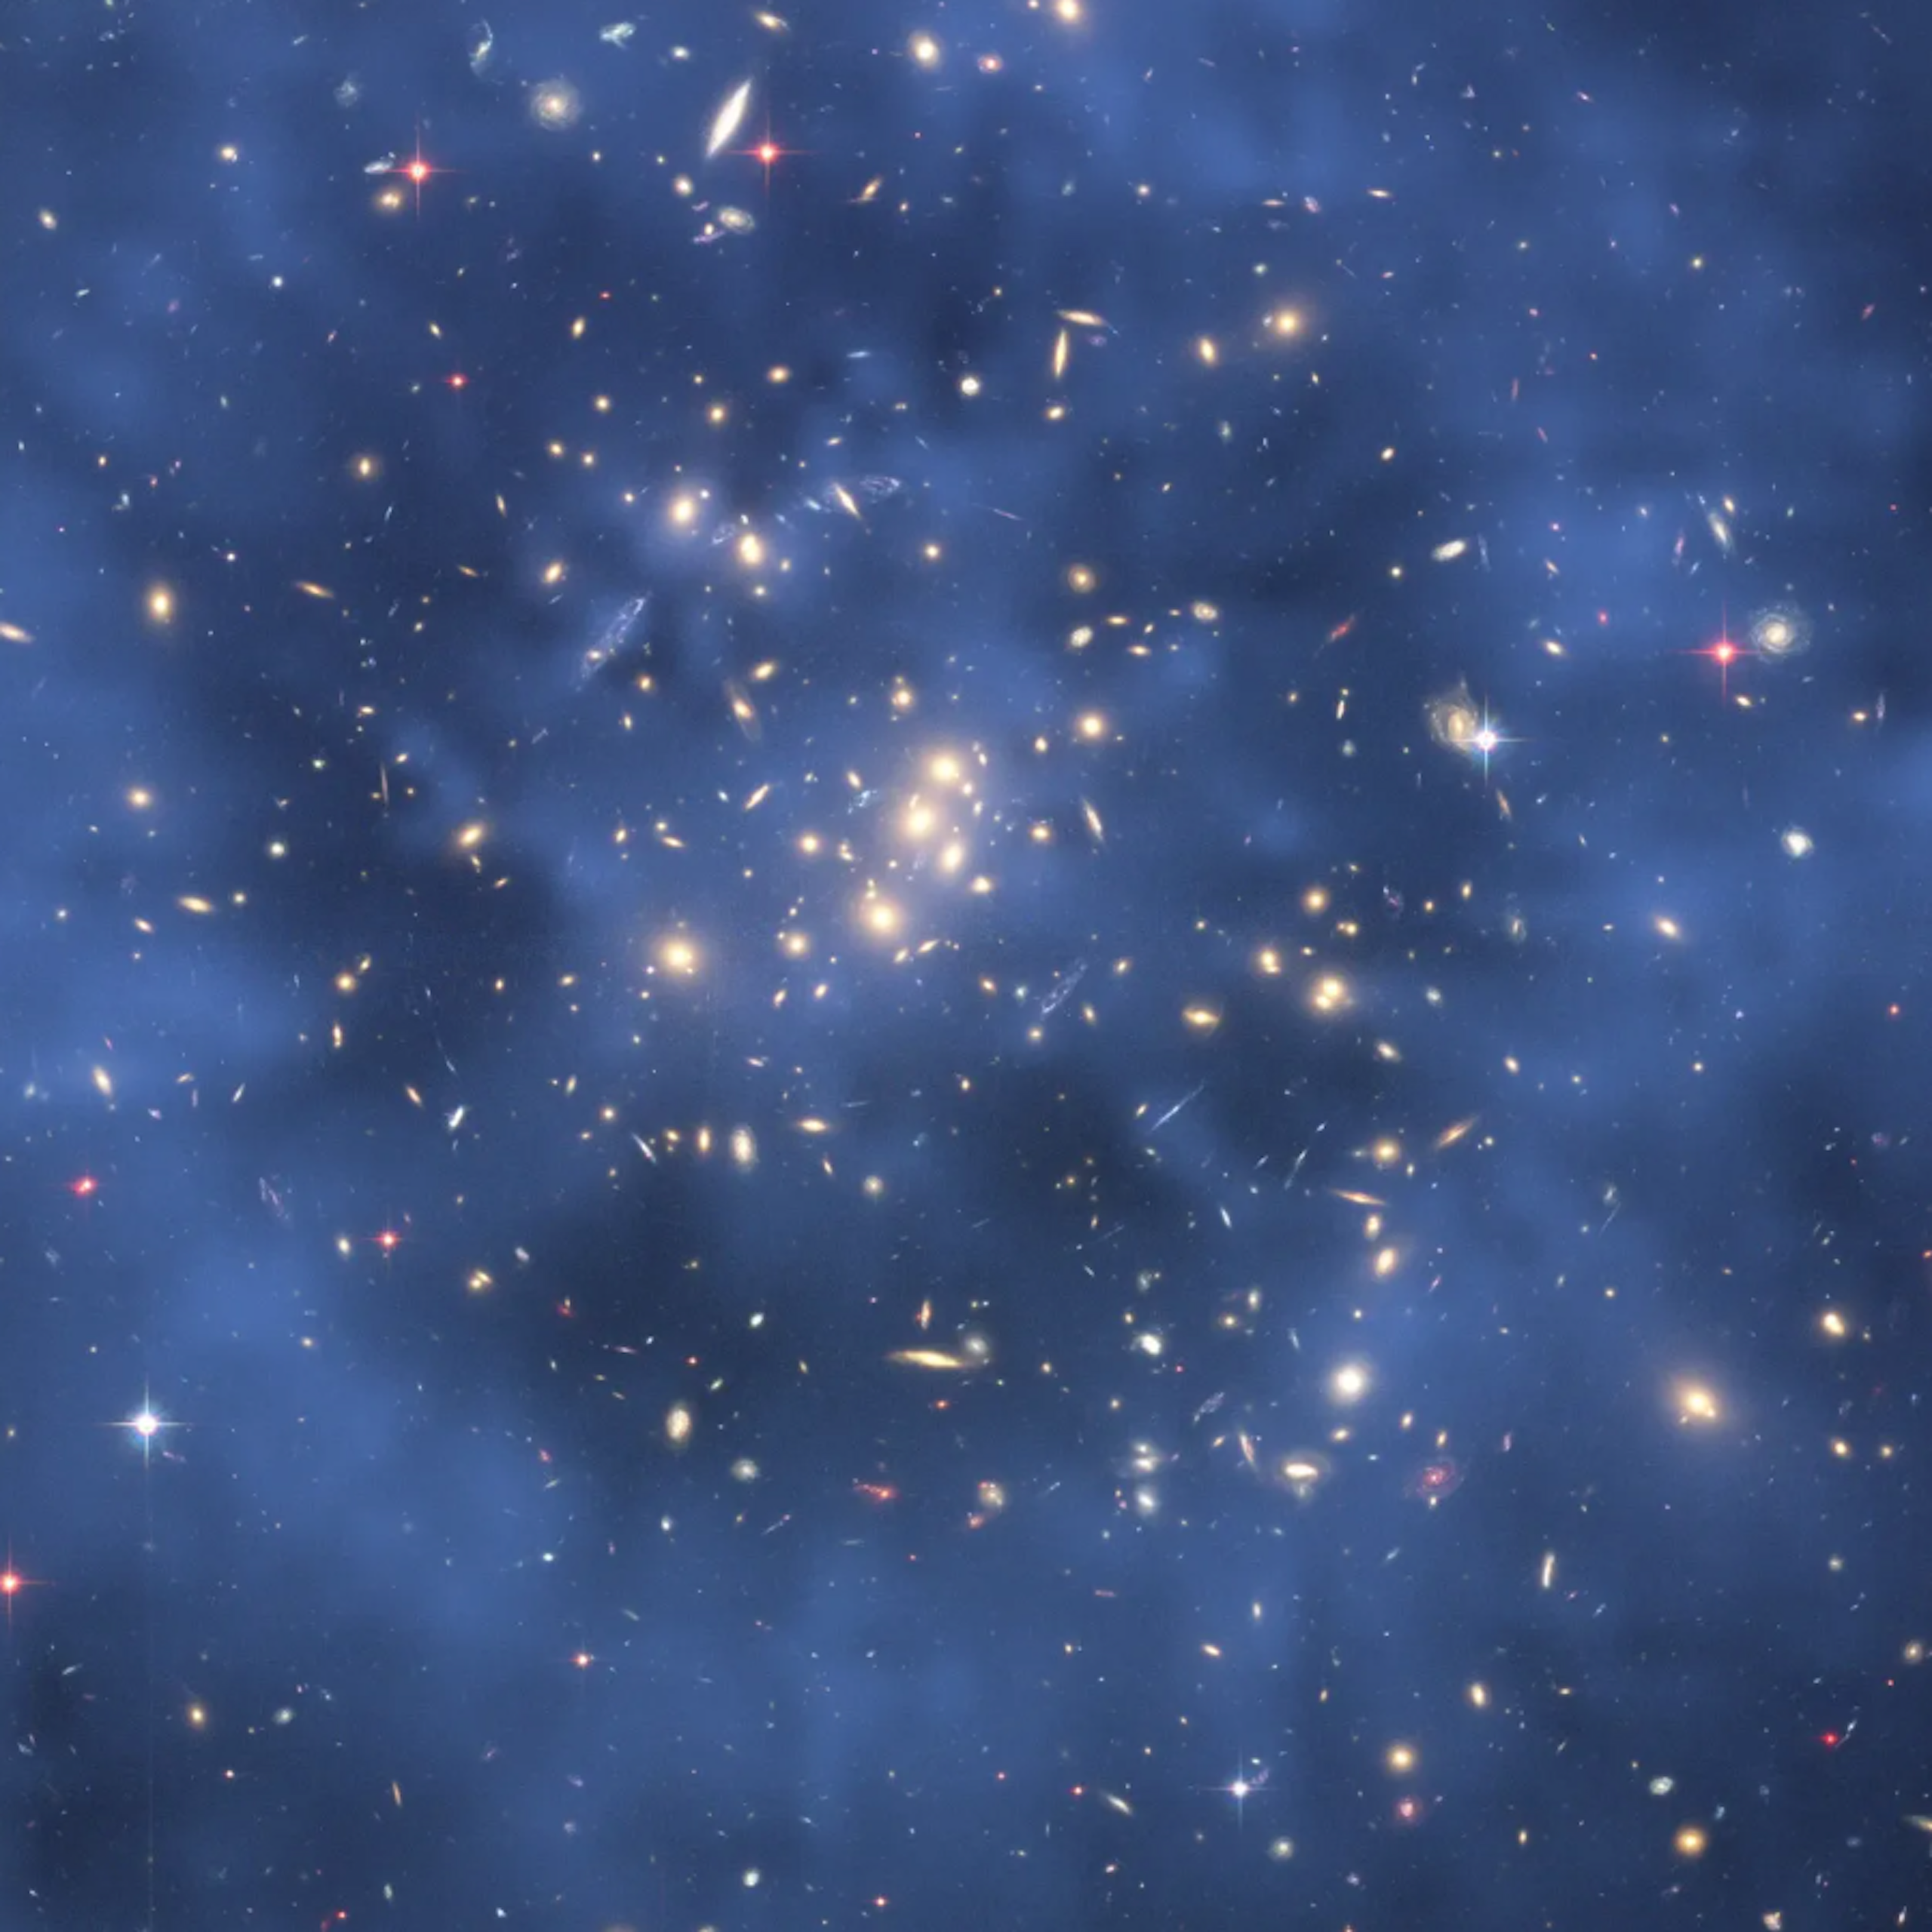 Dark matter: our new experiment aims to turn the ghostly substance into actual light